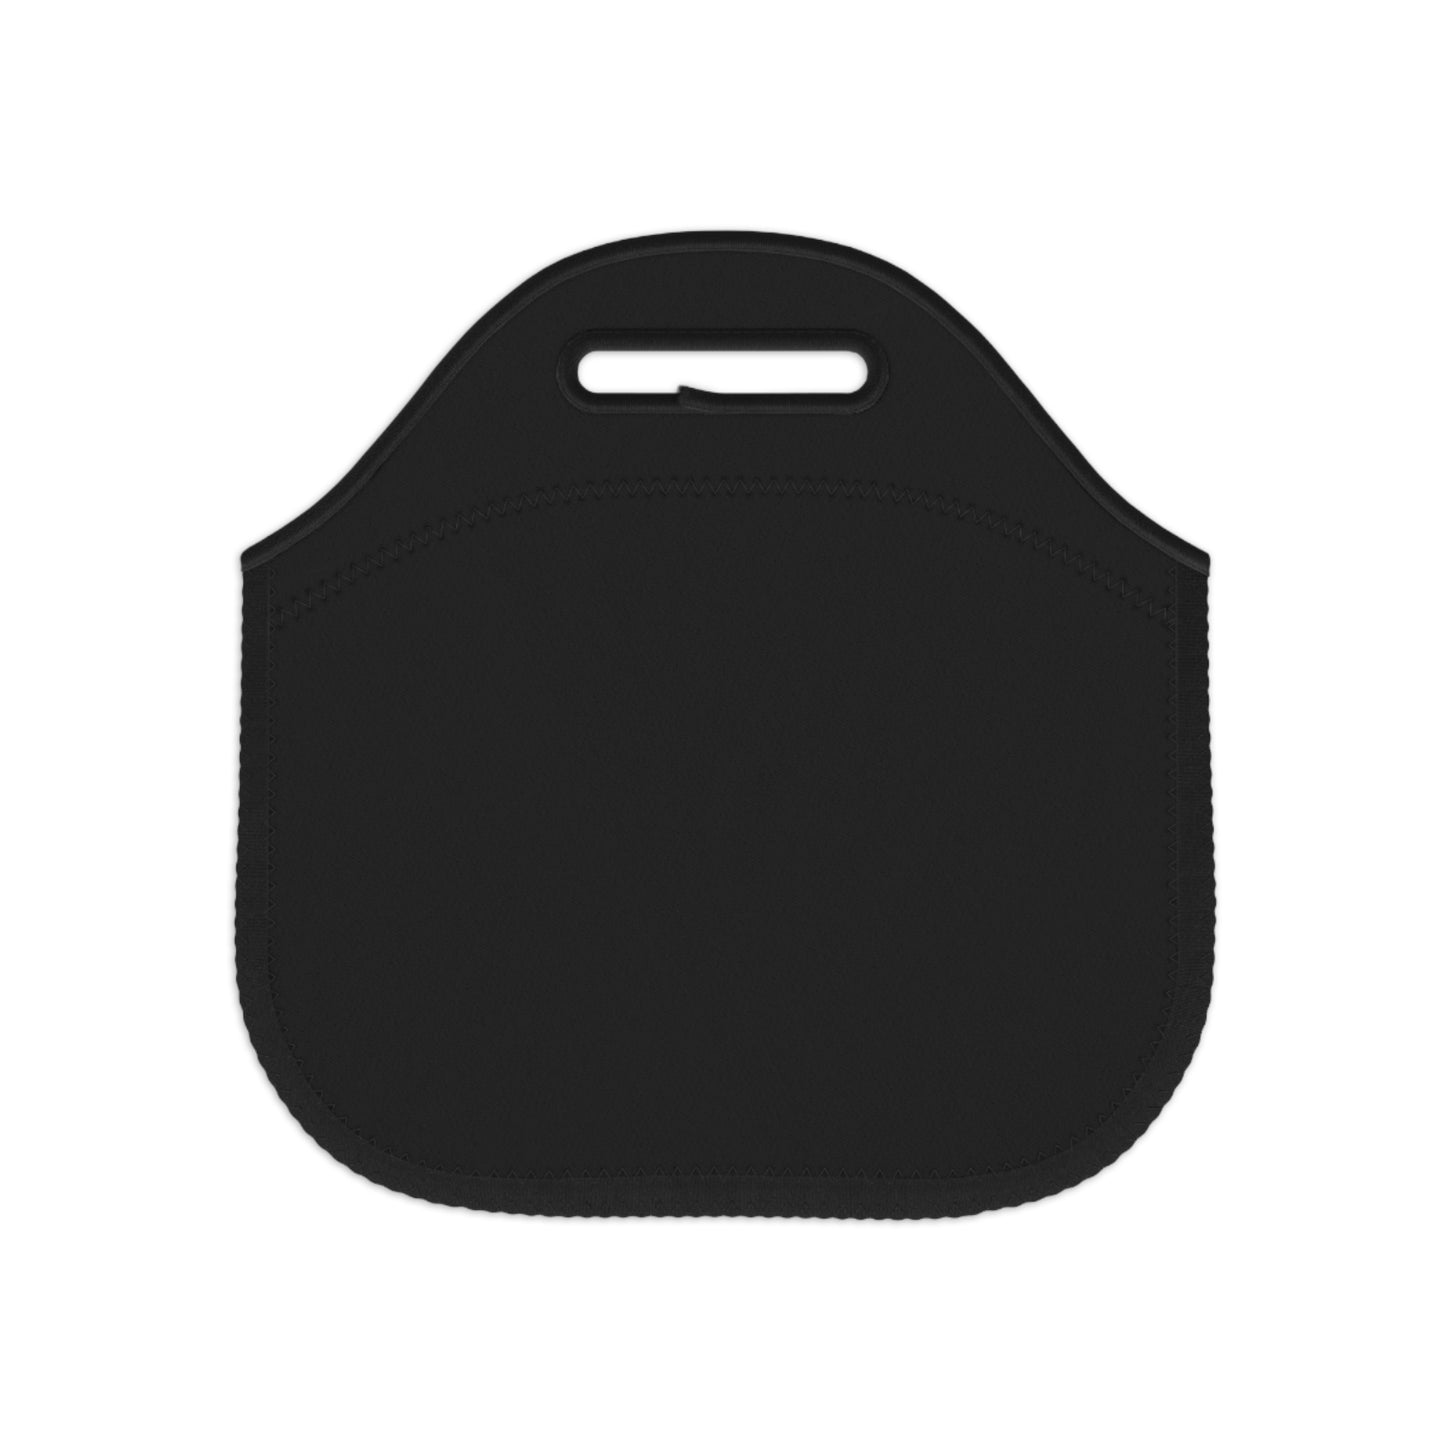 The Half Rooster Neoprene Lunch Bag